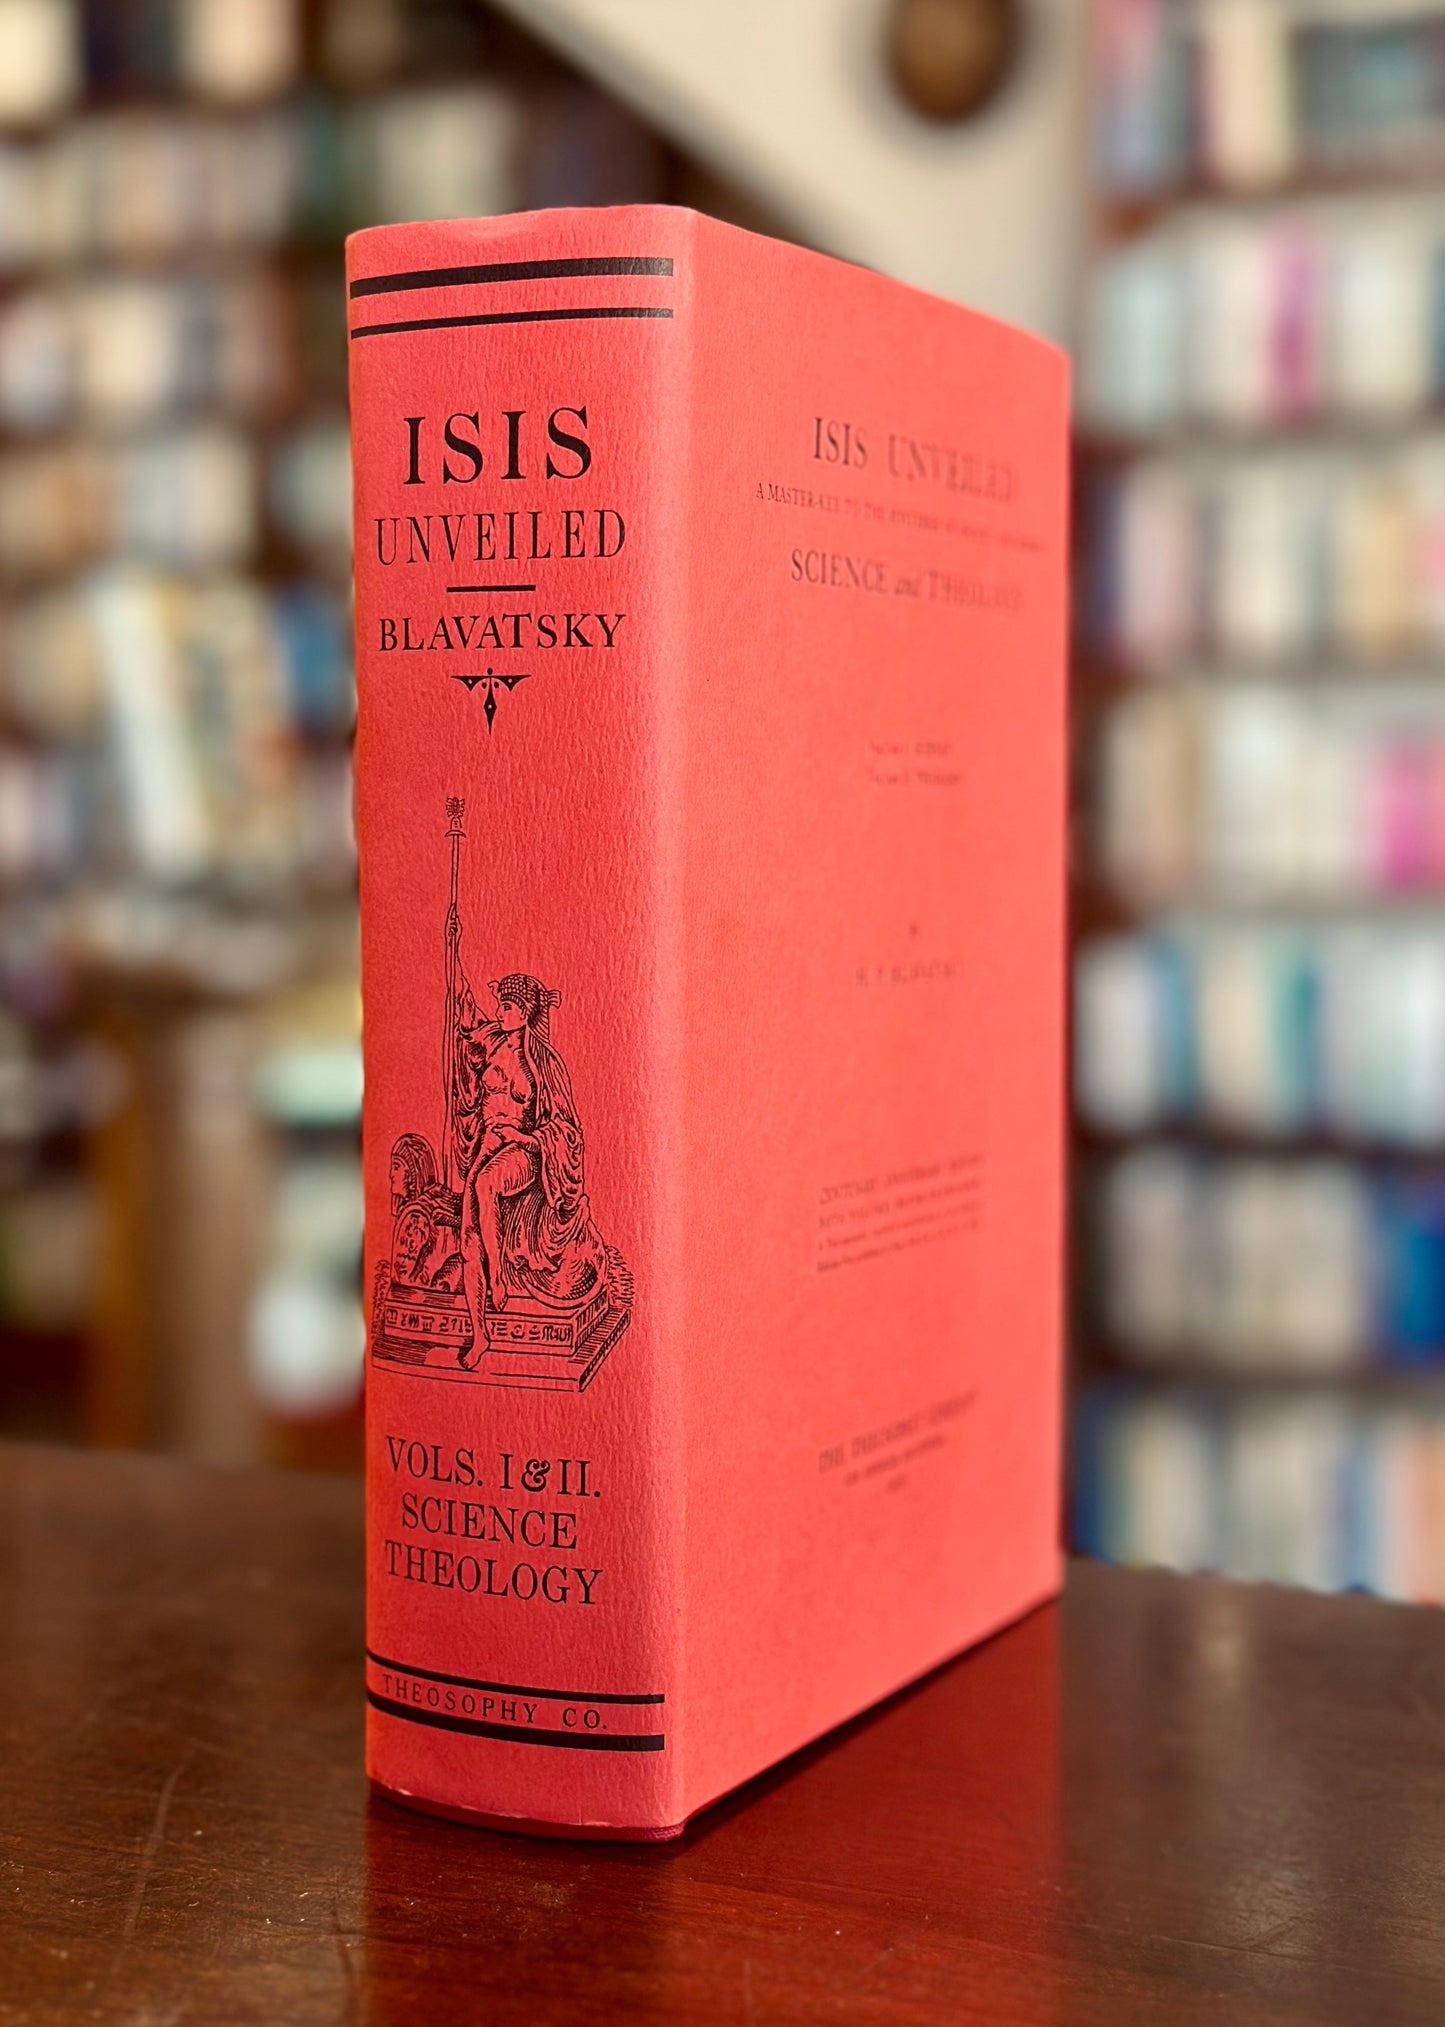 Isis Unveiled by H.P. Blavatsky